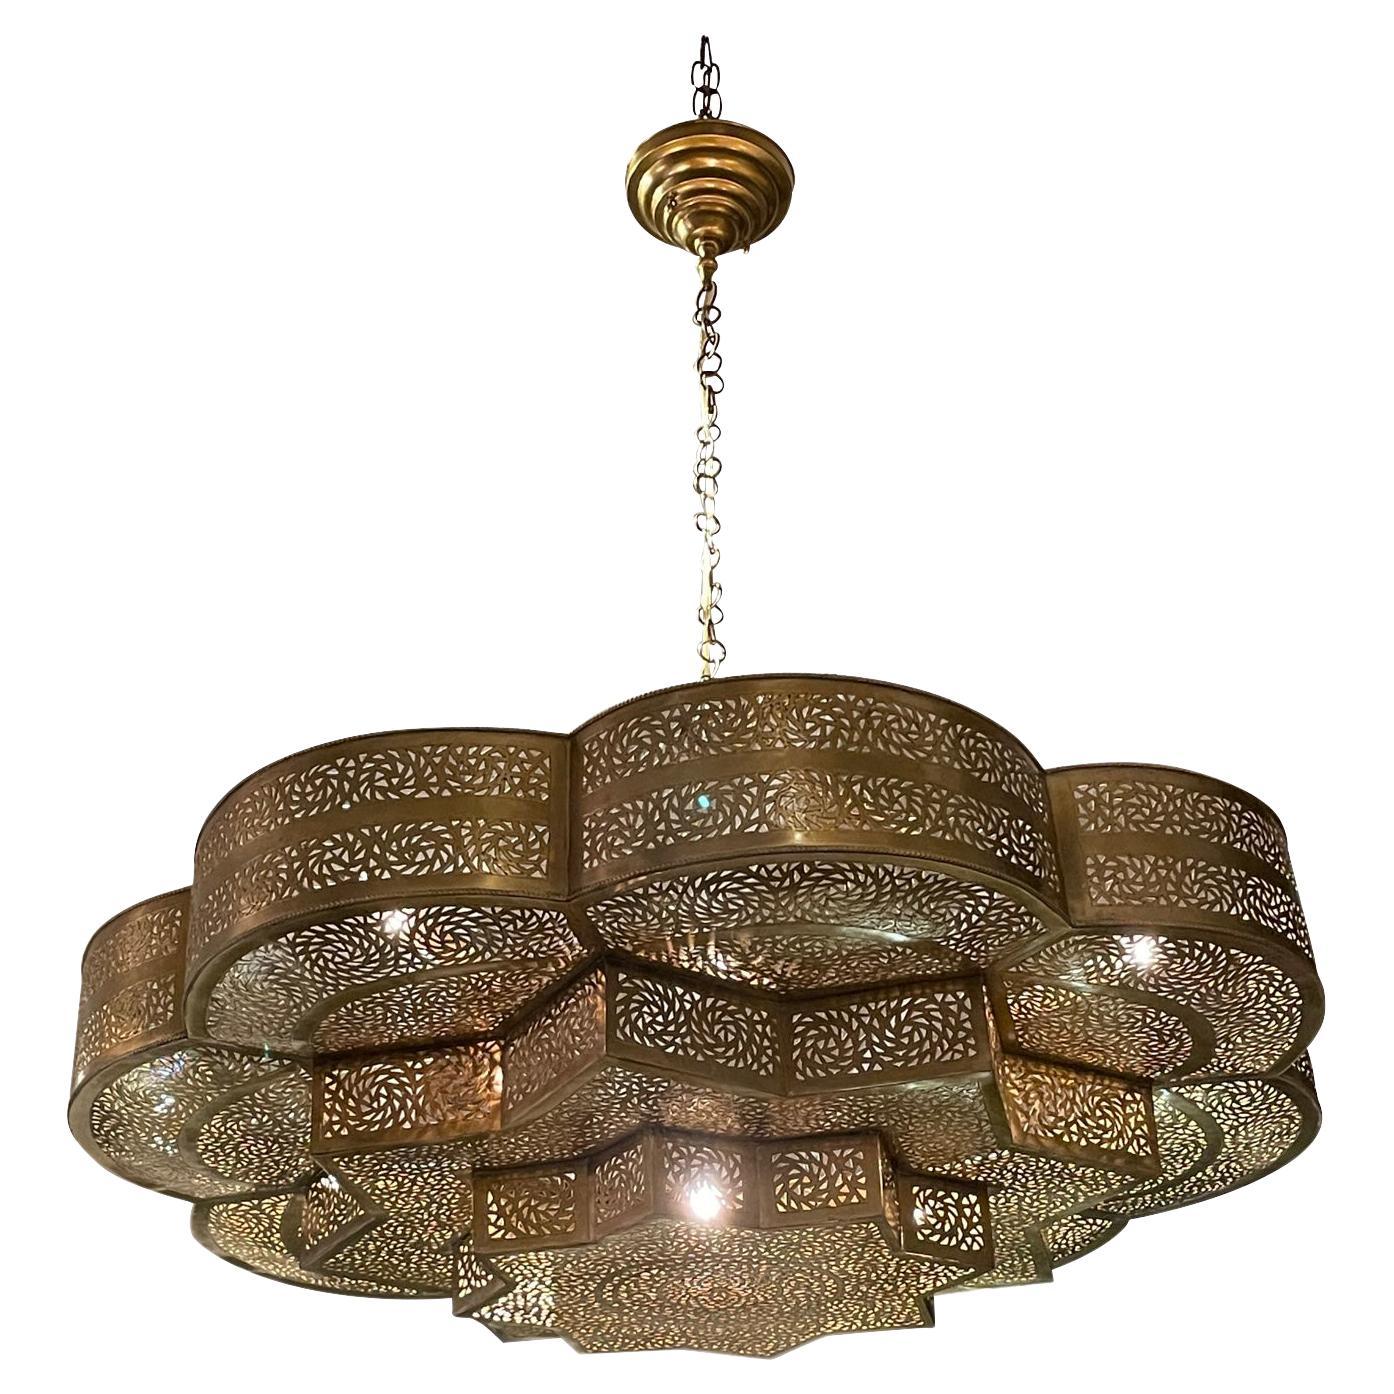 Bronze Multi Tiered Perforated Chandelier, Morocco, Contemporary